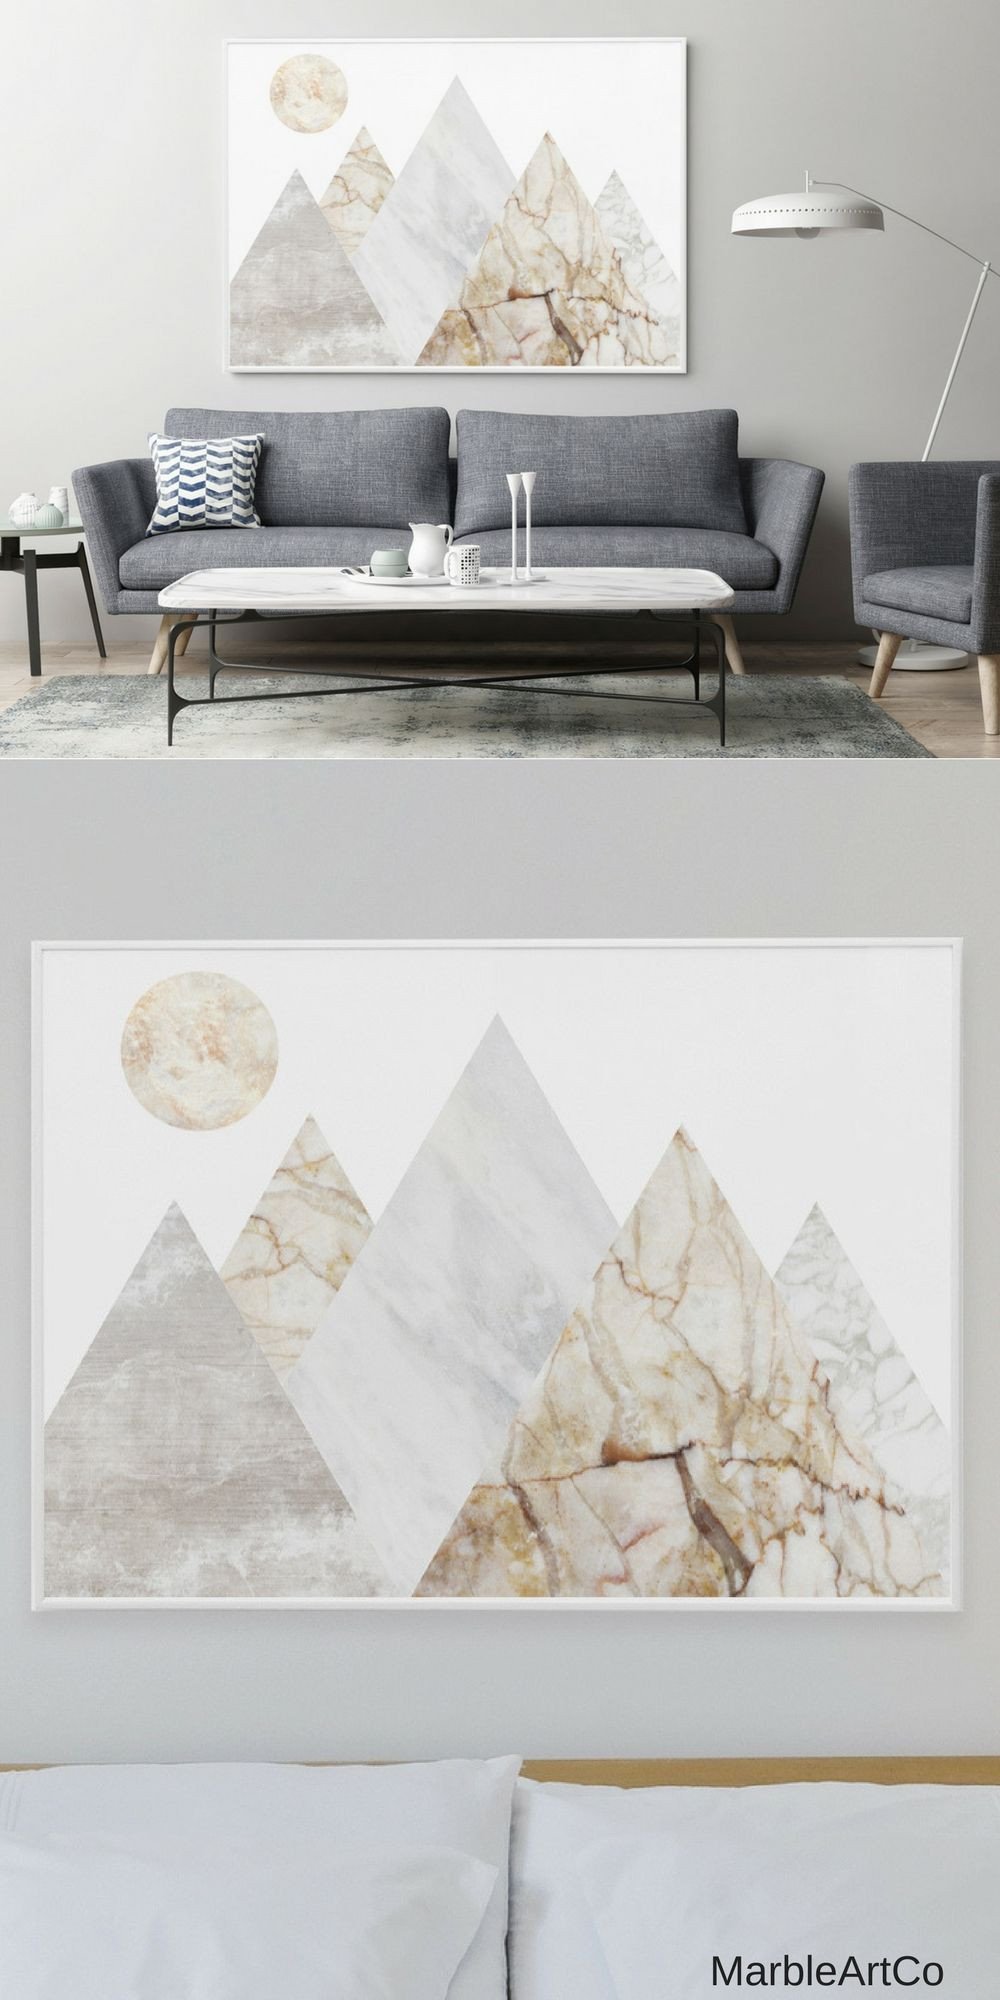 Artwork for Bedroom Wall Awesome Mountains Extra Wall Art Bedroom Decor Nature Framed